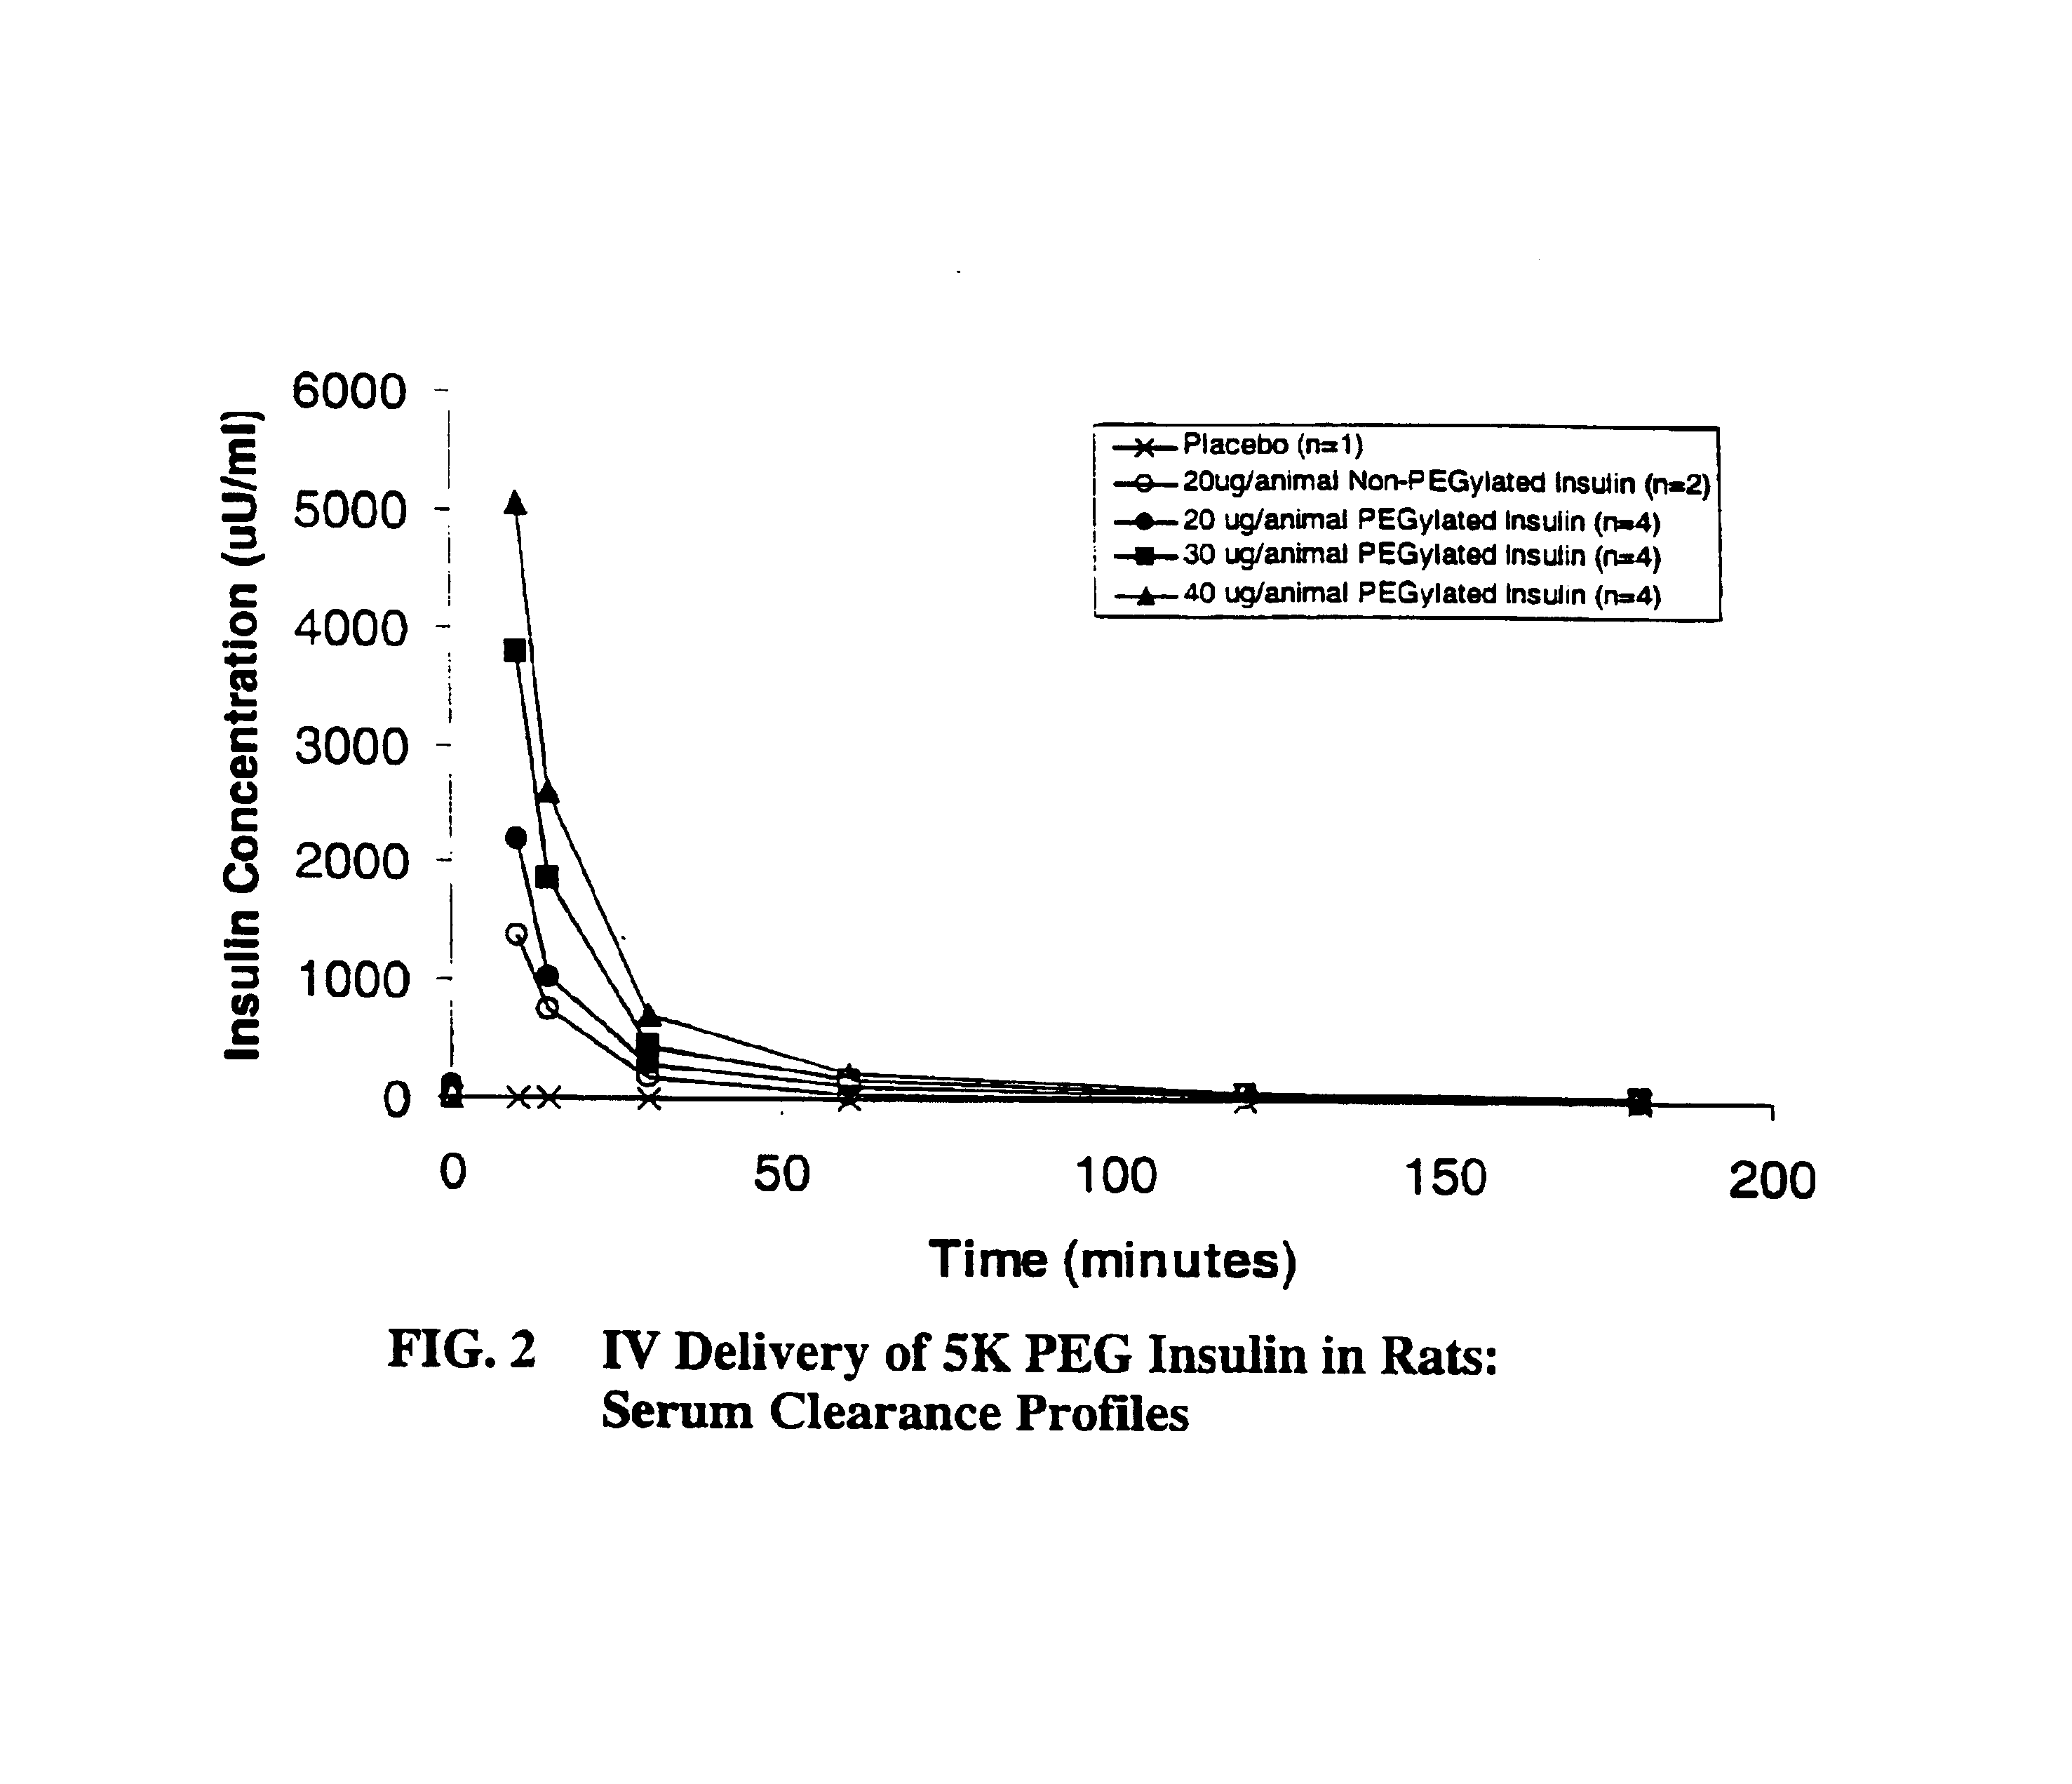 Compositions of chemically modified insulin